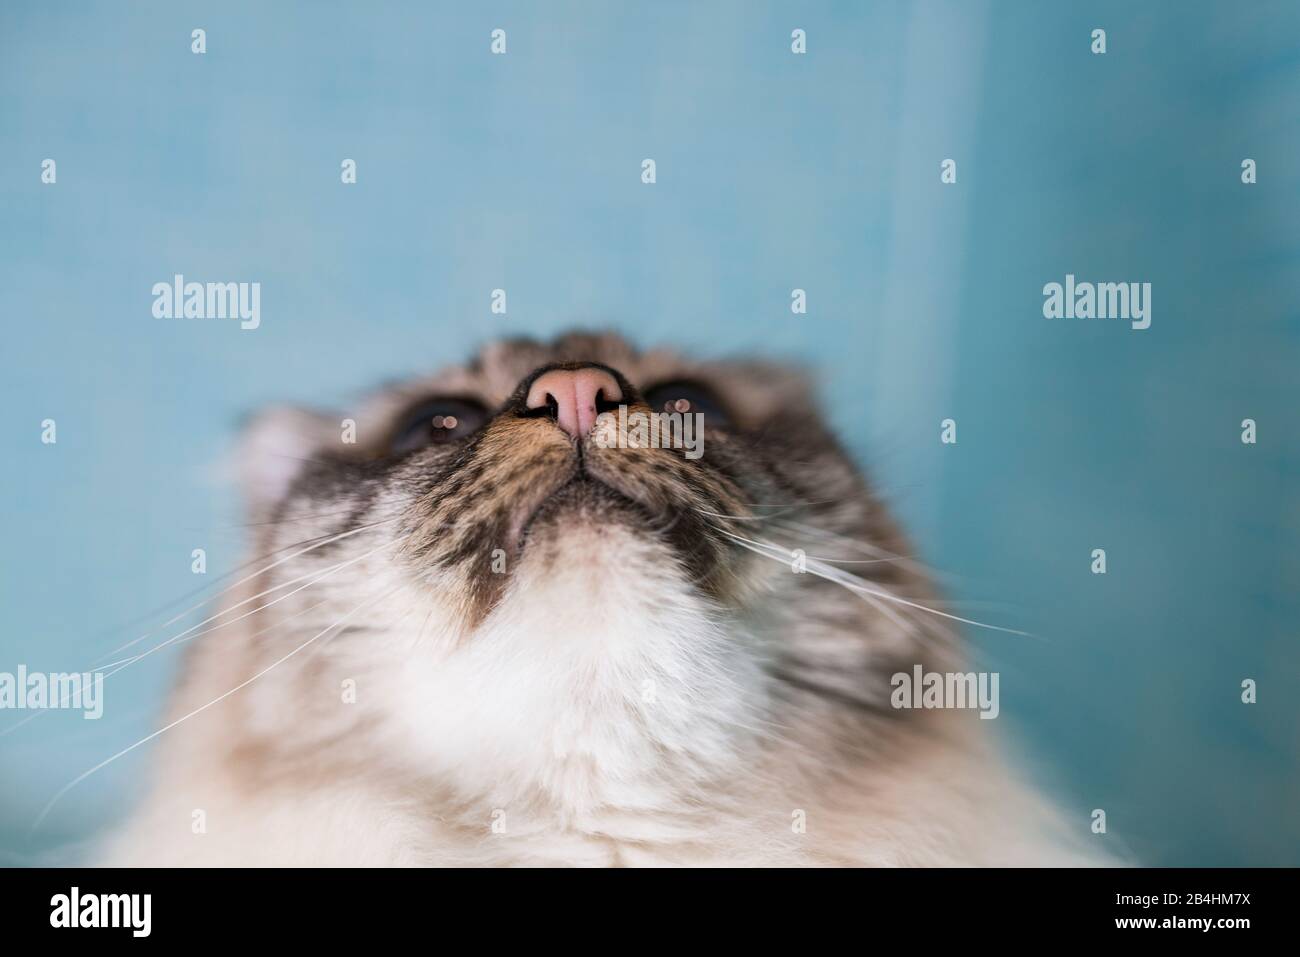 A view of the head of a Birman cat in front of a turquoise background Stock Photo